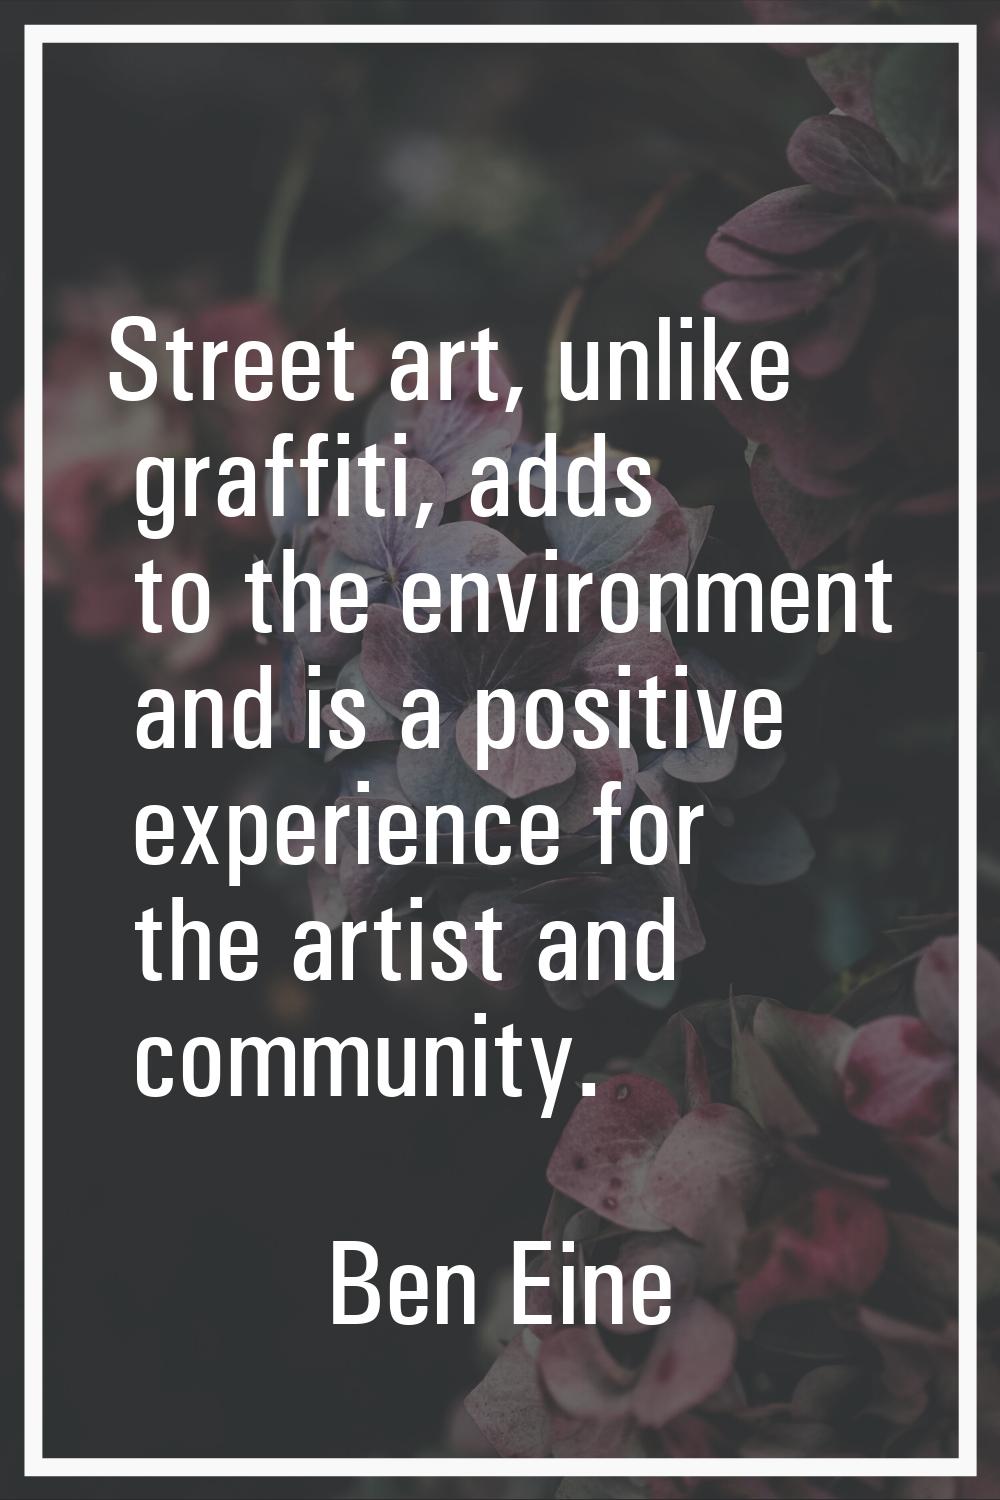 Street art, unlike graffiti, adds to the environment and is a positive experience for the artist an